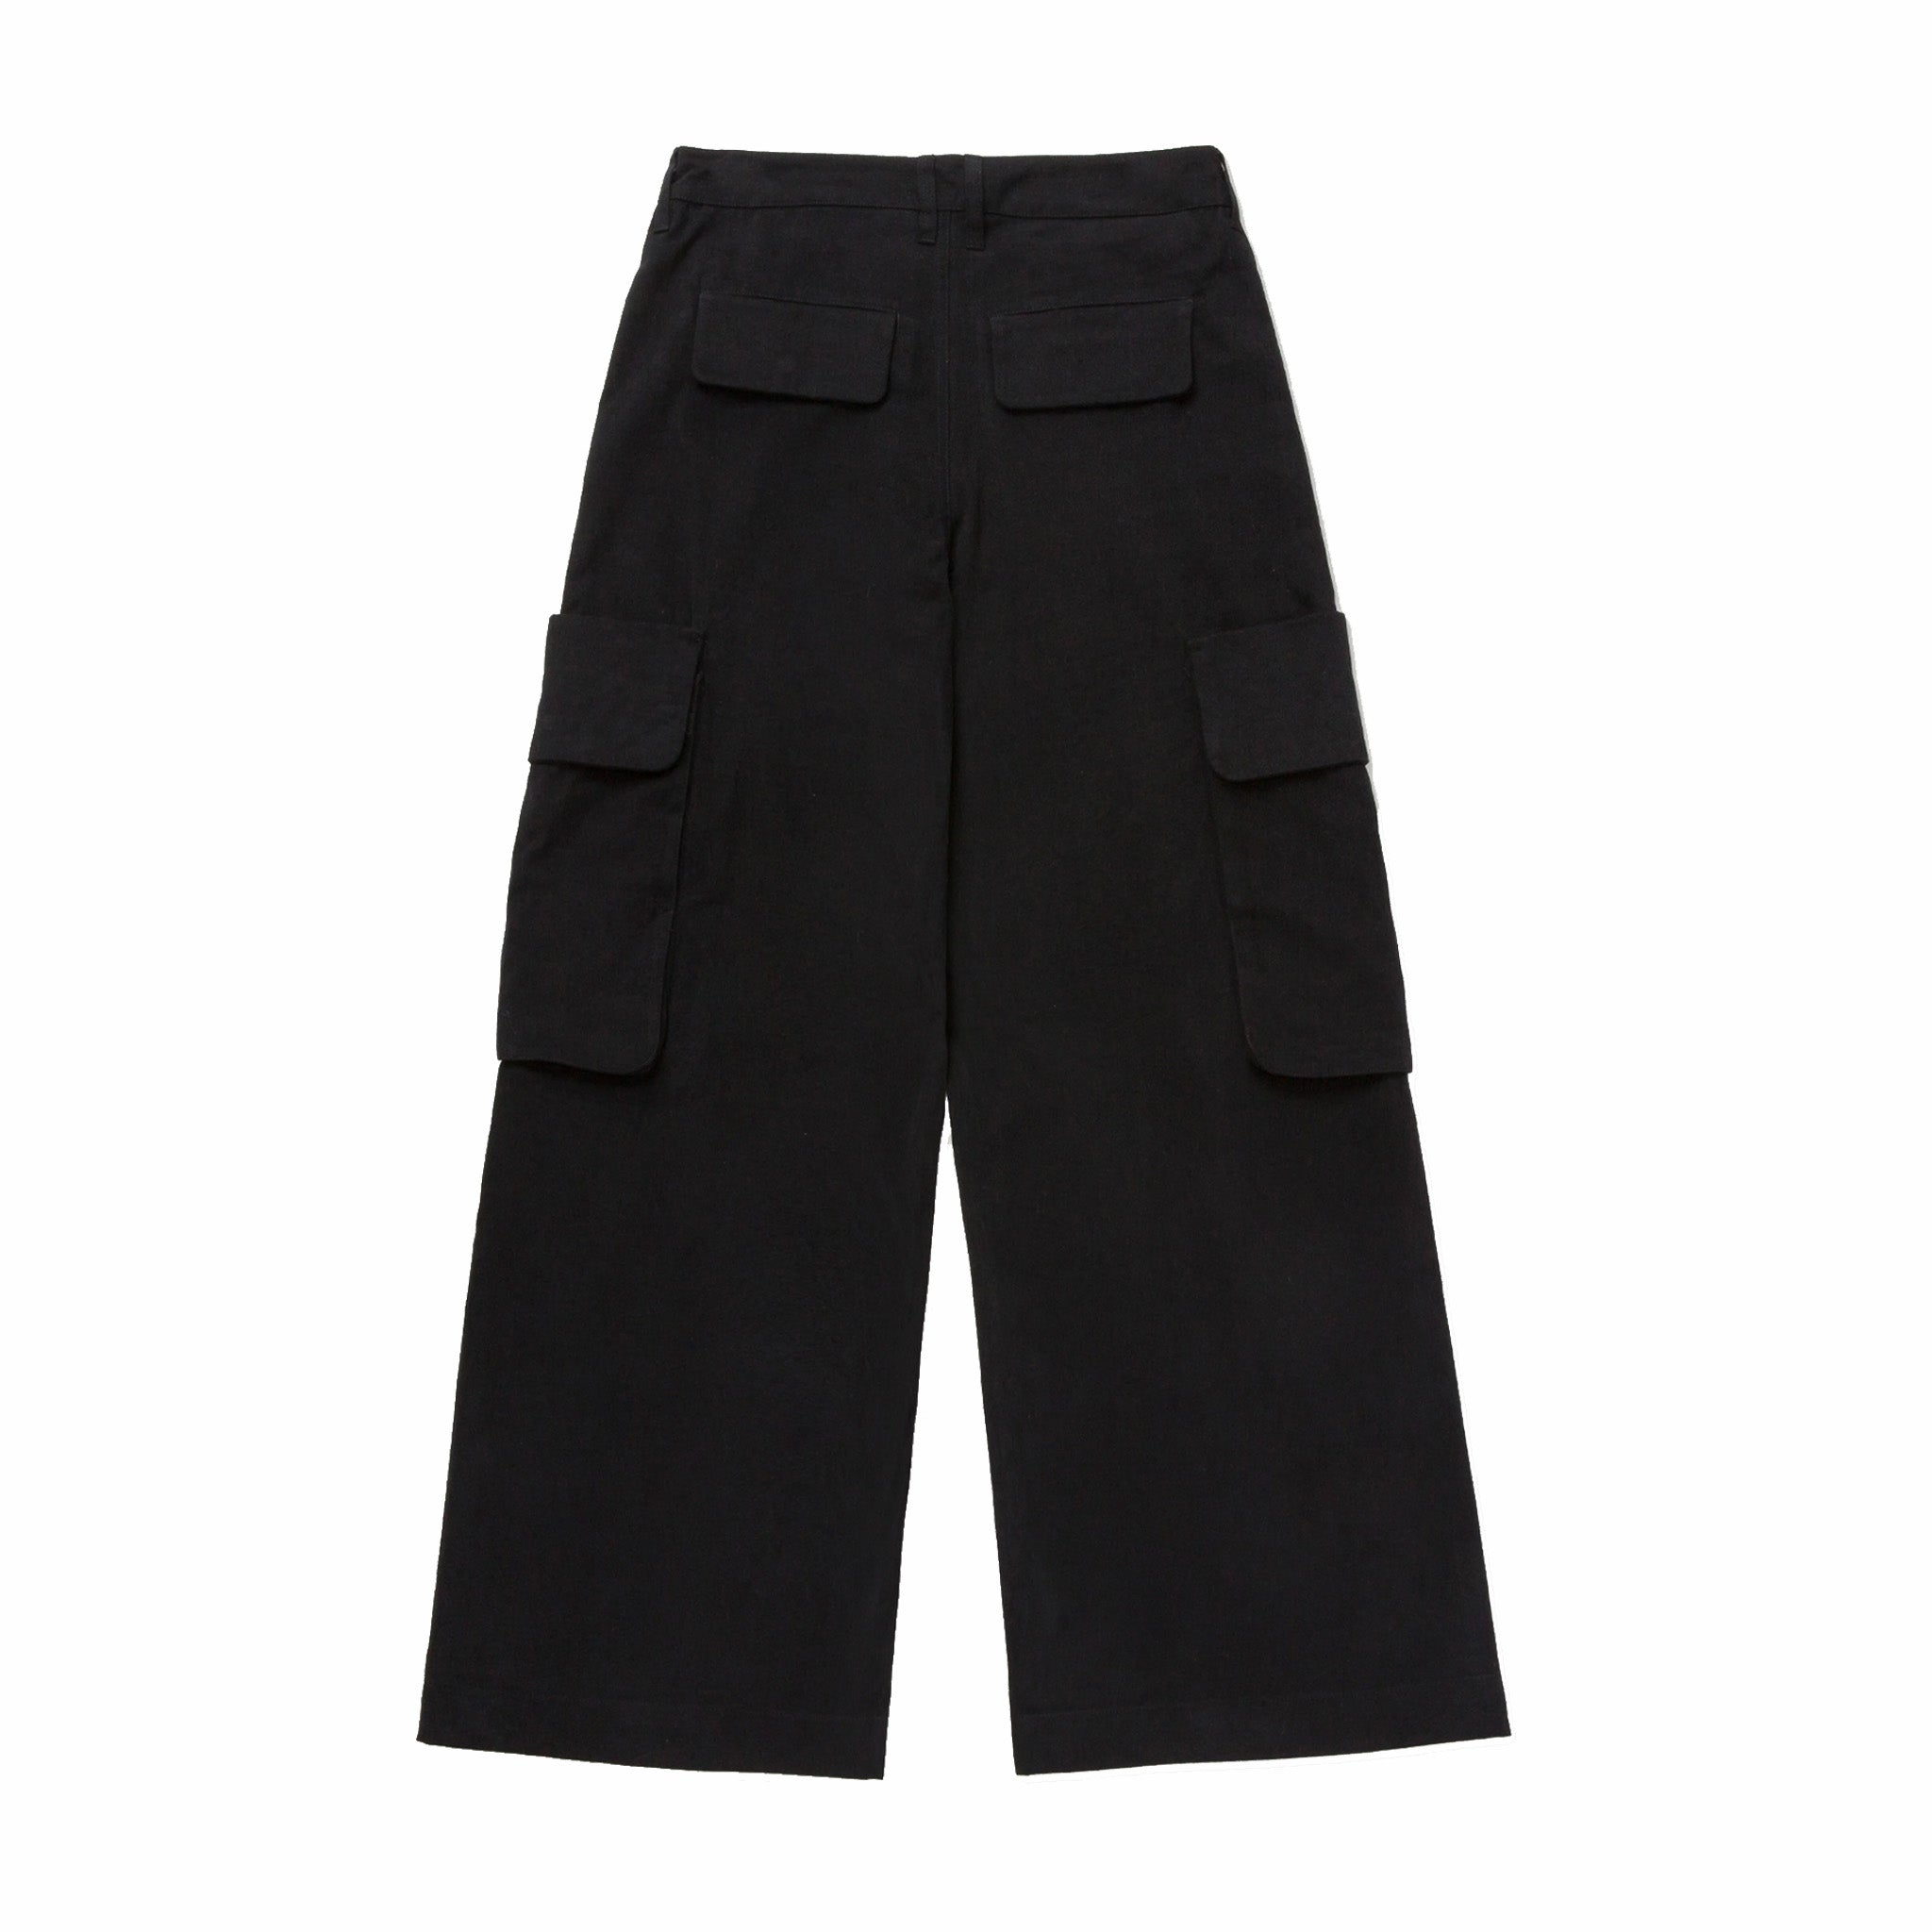 Honor The Gift Wide Leg Cargo Pant (Black) - August Shop